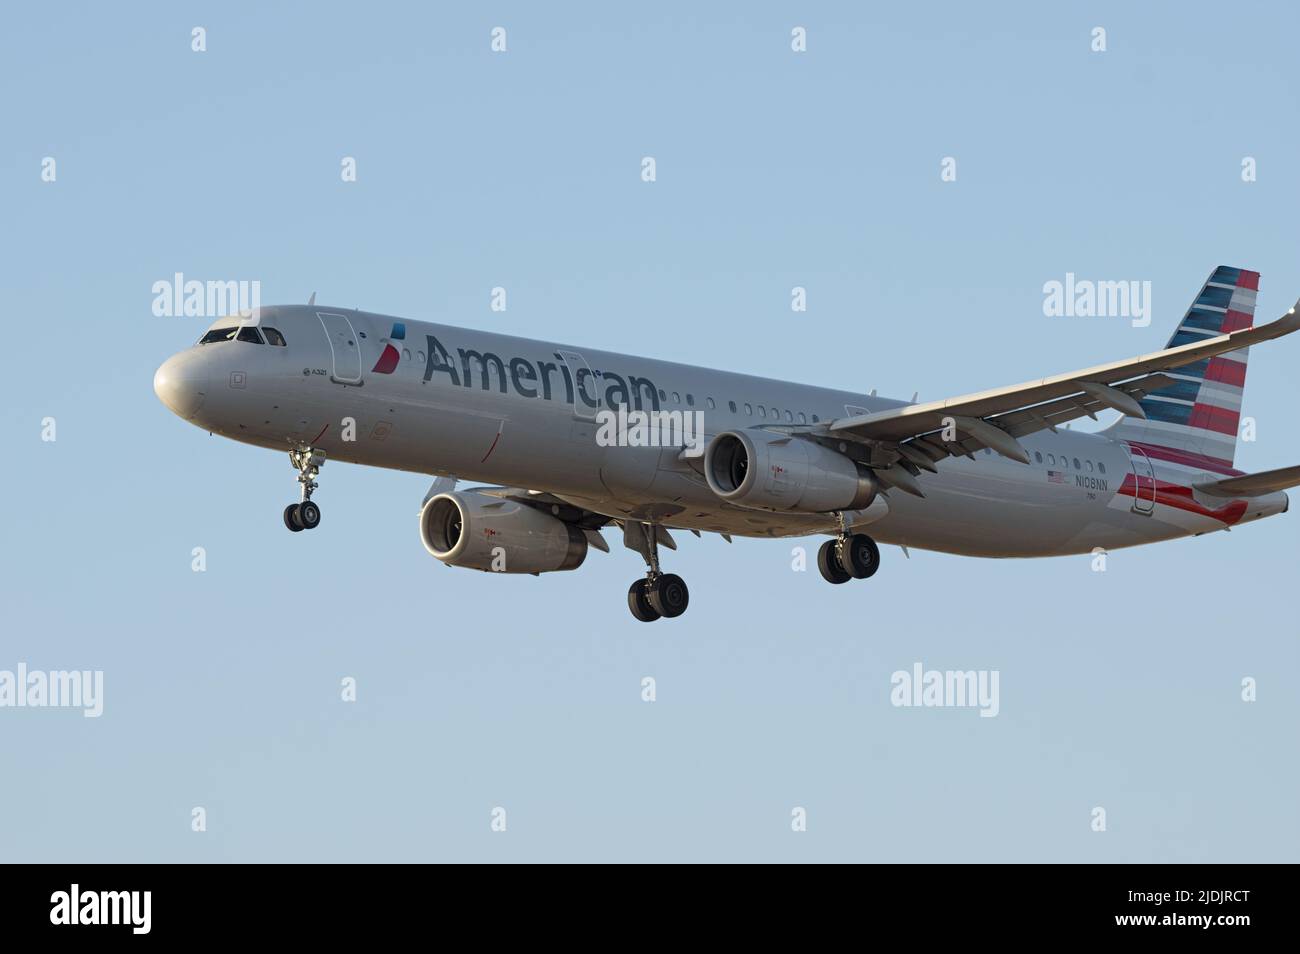 American Airlines Airbus A321-231 jet with registration N108NN arriving at LAX, Los Angeles, California, USA on May 8, 2022. Stock Photo